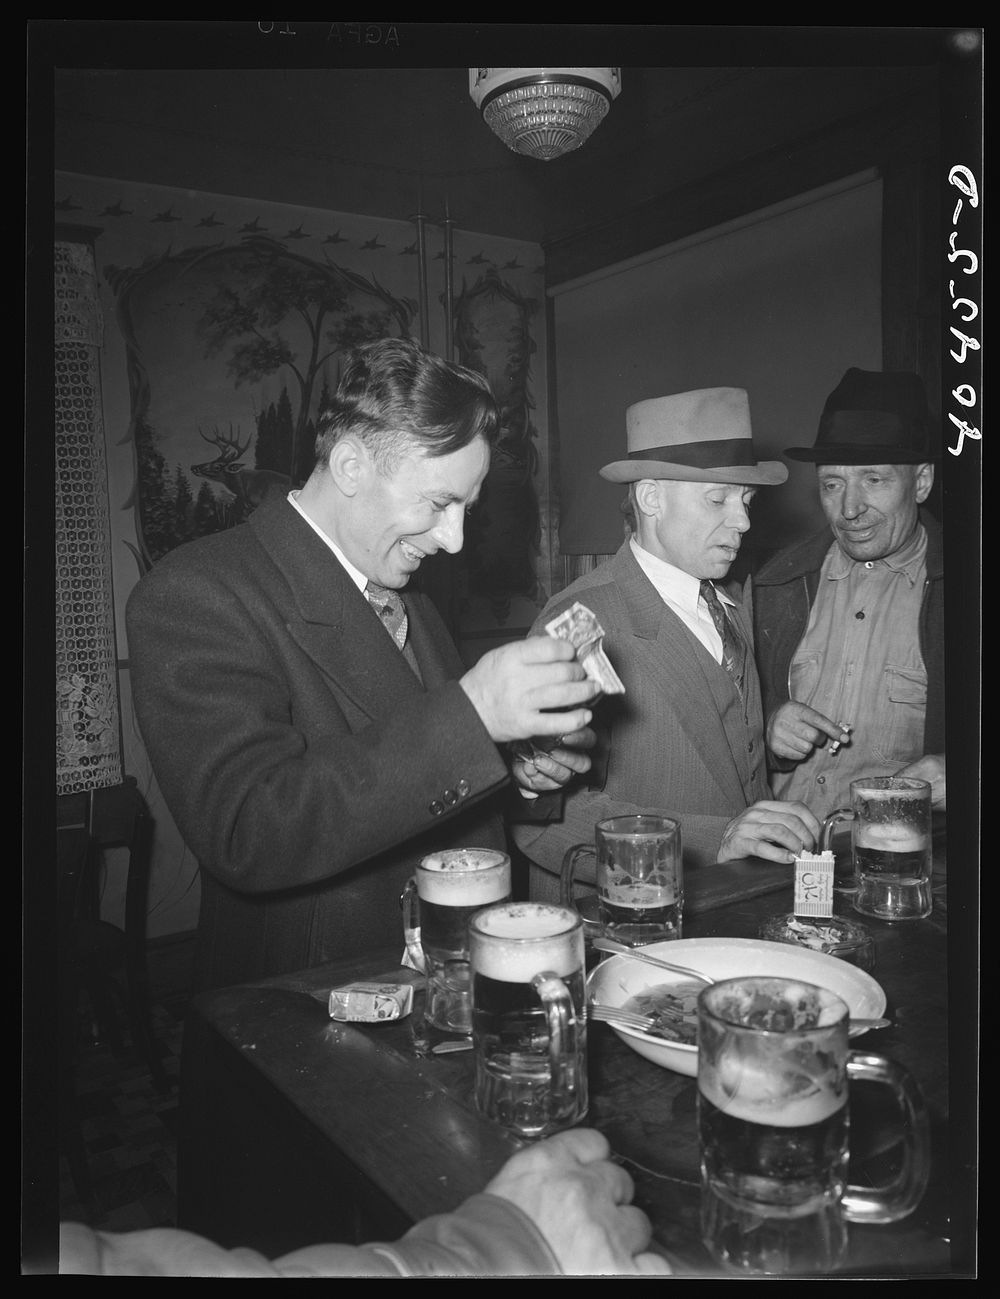 Shenandoah, Pennsylvania. Filipek's barroom where men are having lunch. Sourced from the Library of Congress.